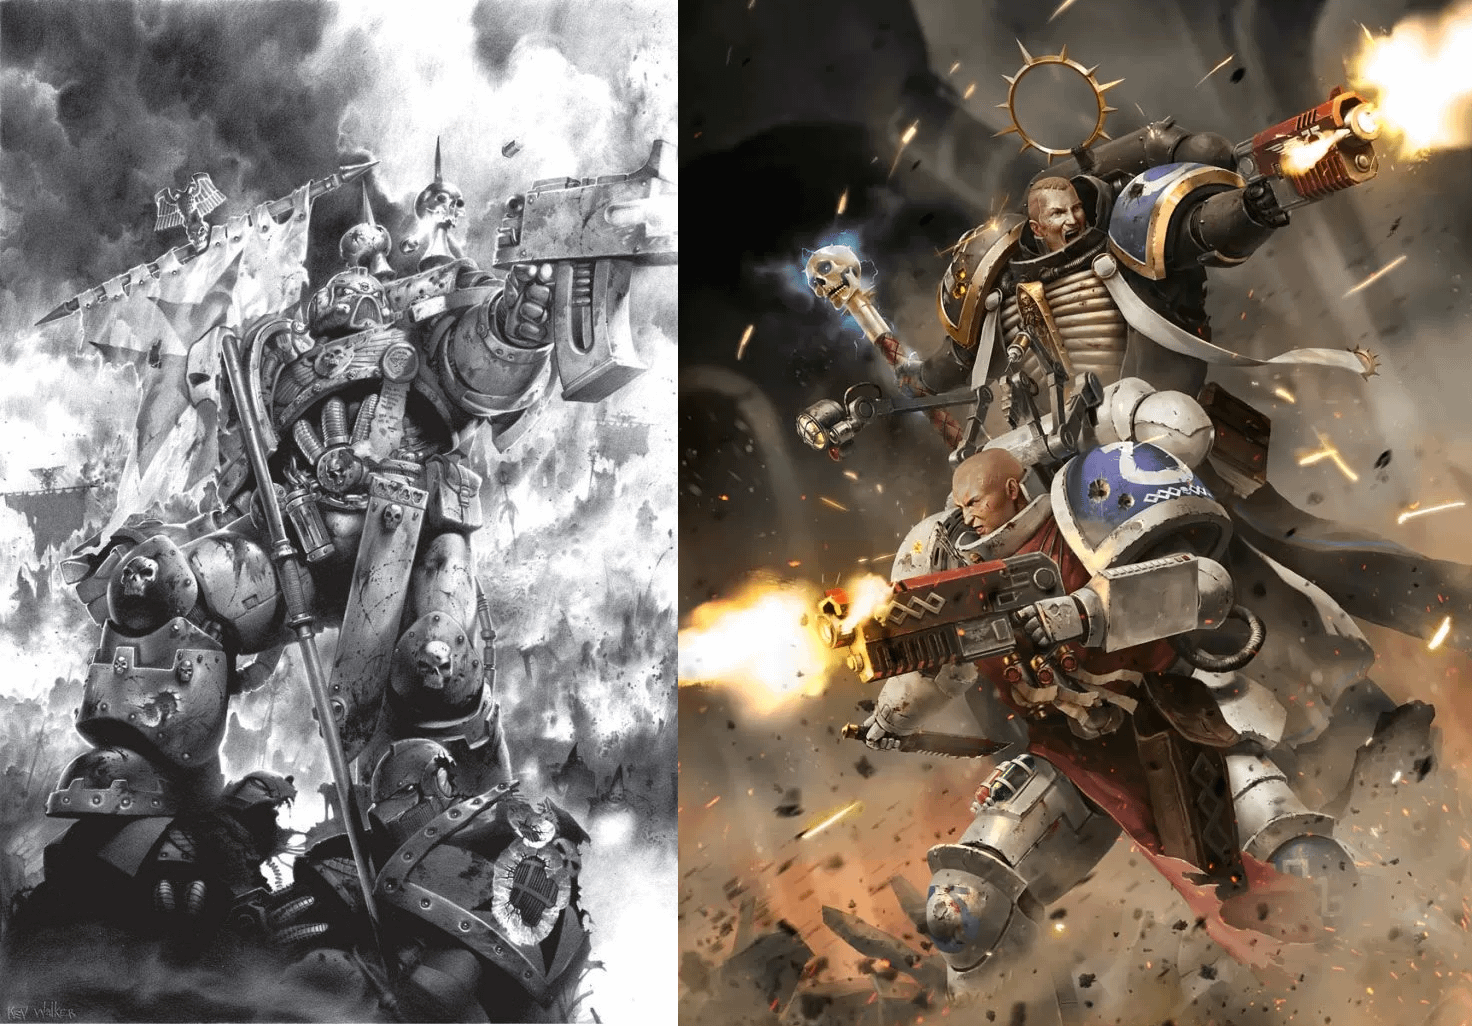 The Warhammer 40k Art Collection: Appreciating the Visual World of 40k